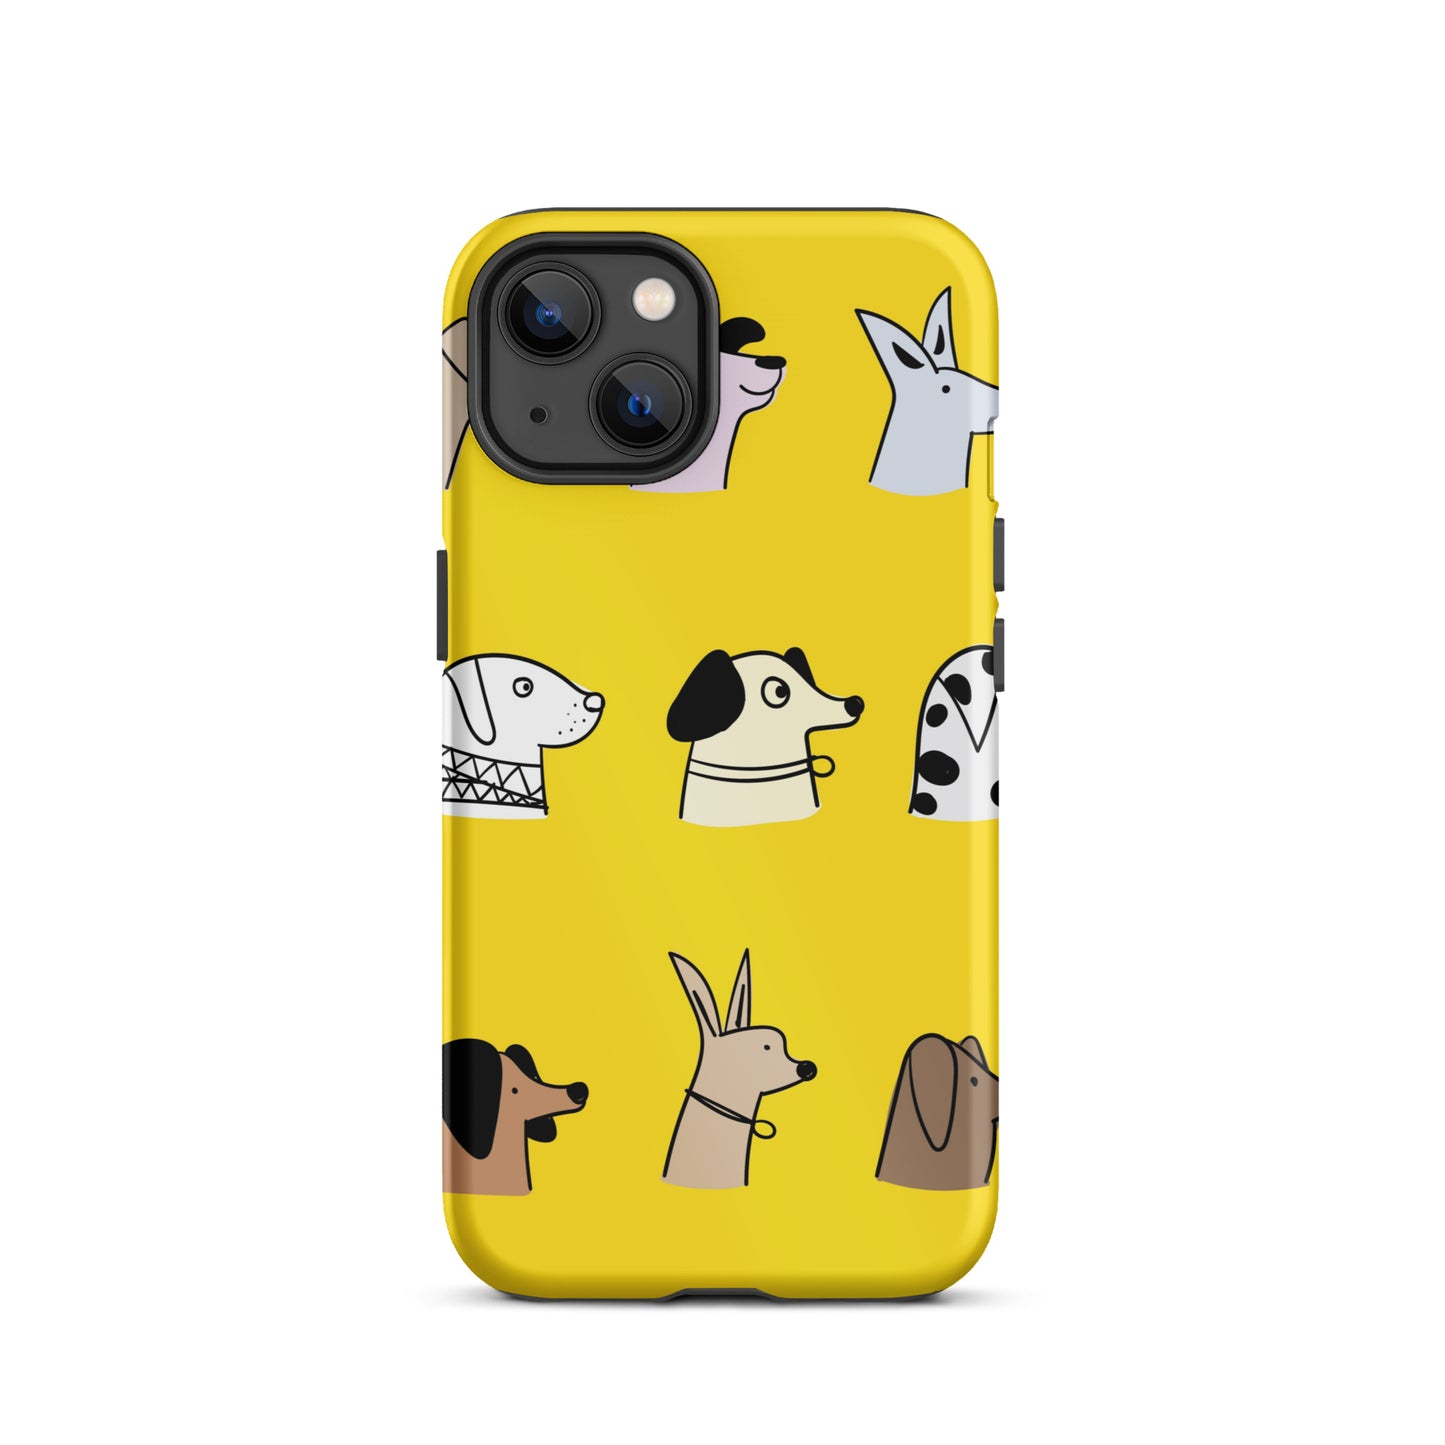 Dogs iPhone case